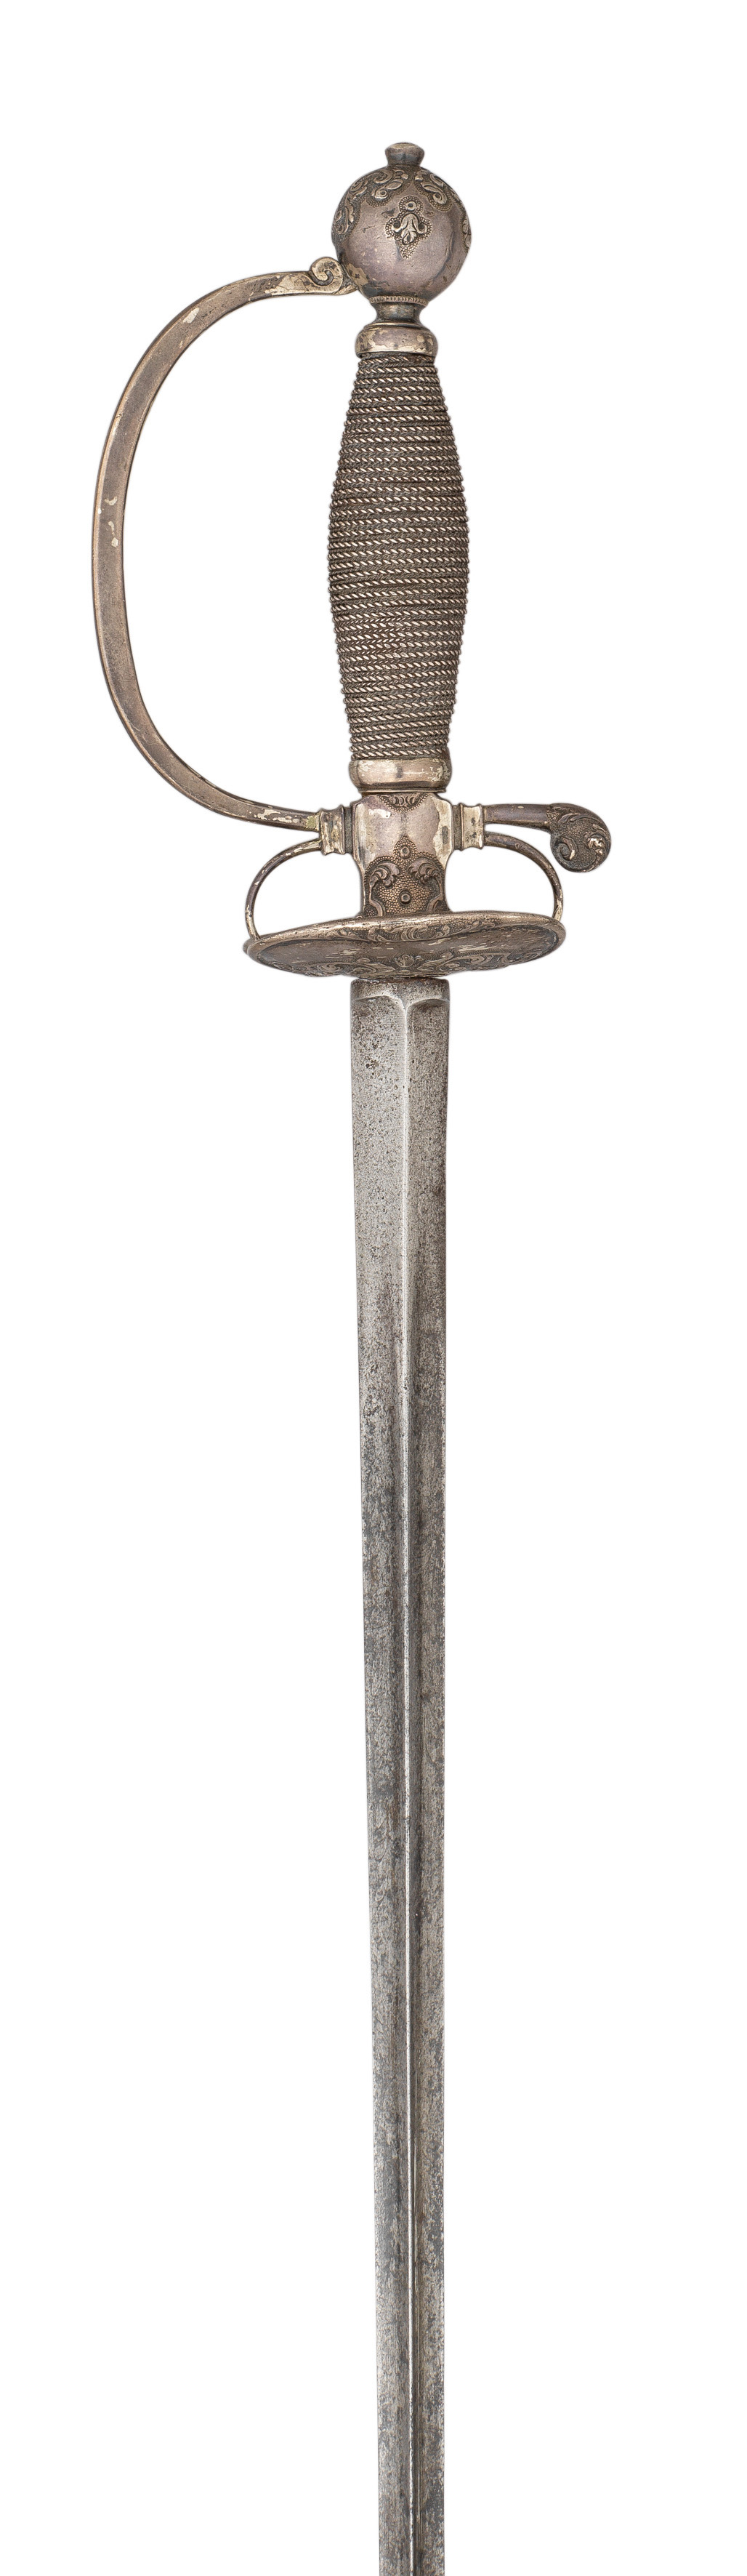 A NORTH EUROPEAN SILVER-HILTED SMALLSWORD^ LATE 17TH CENTURY